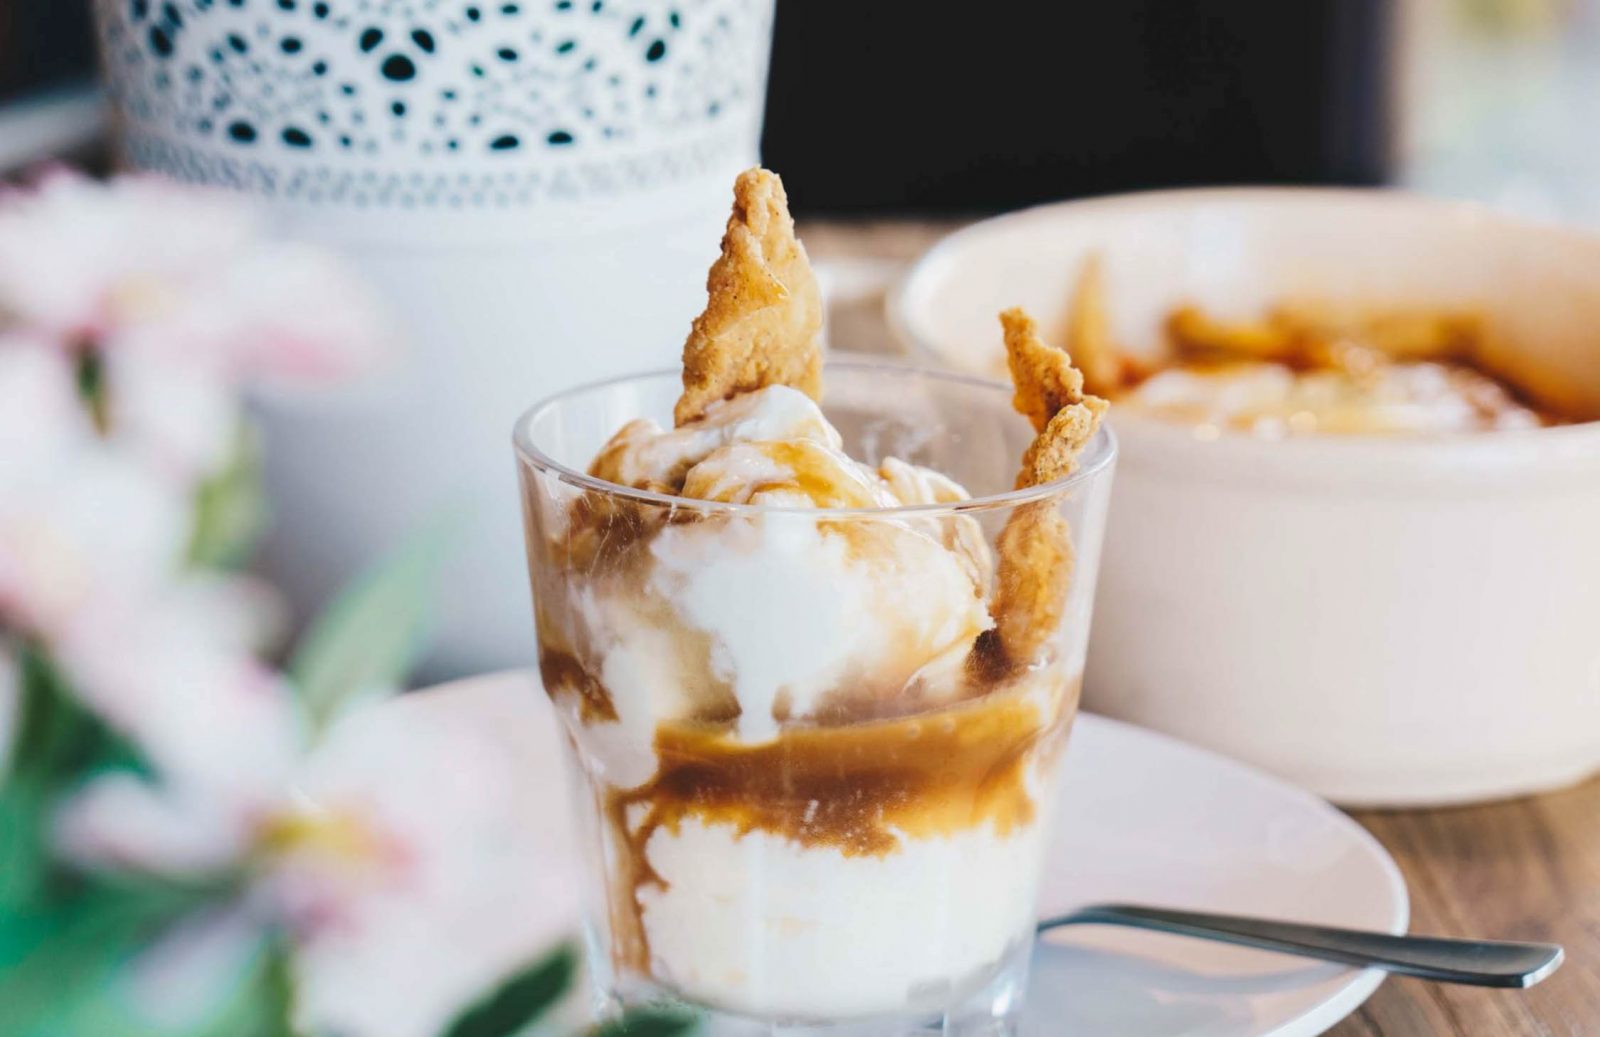 🍦 It’s Time to Vote “Yay” Or “Nay” On These Unusual Ice Cream Flavors Fried Chicken Caramel Ice Cream